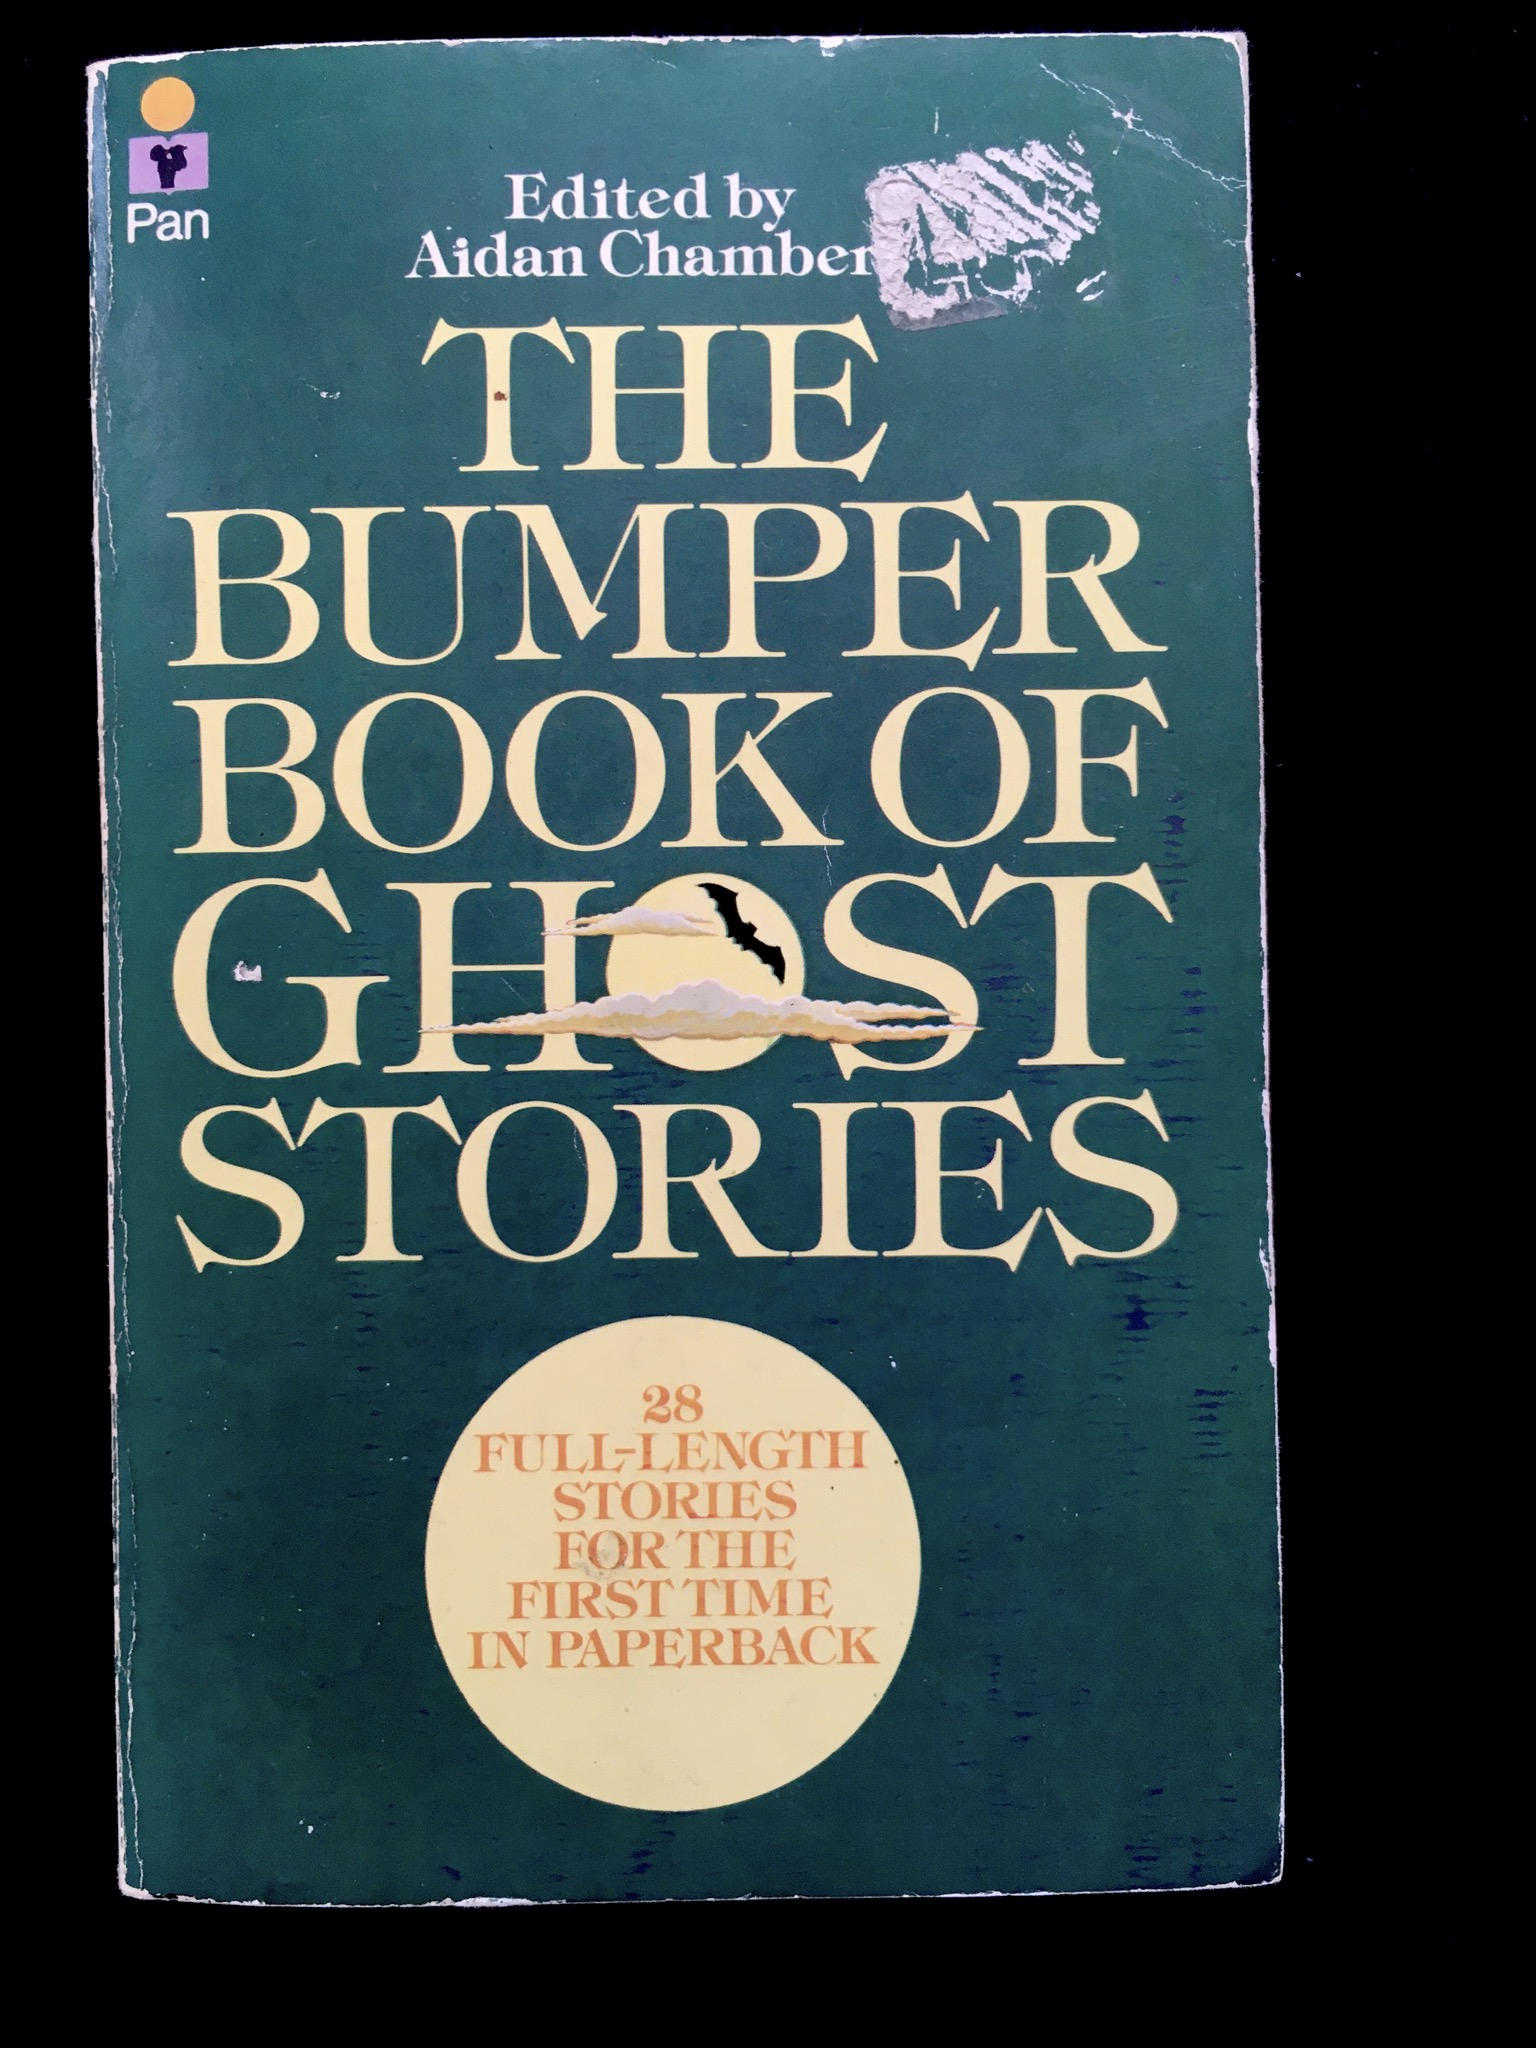 The Bumper Book of Ghost Stories Edited by Aidan Chambers